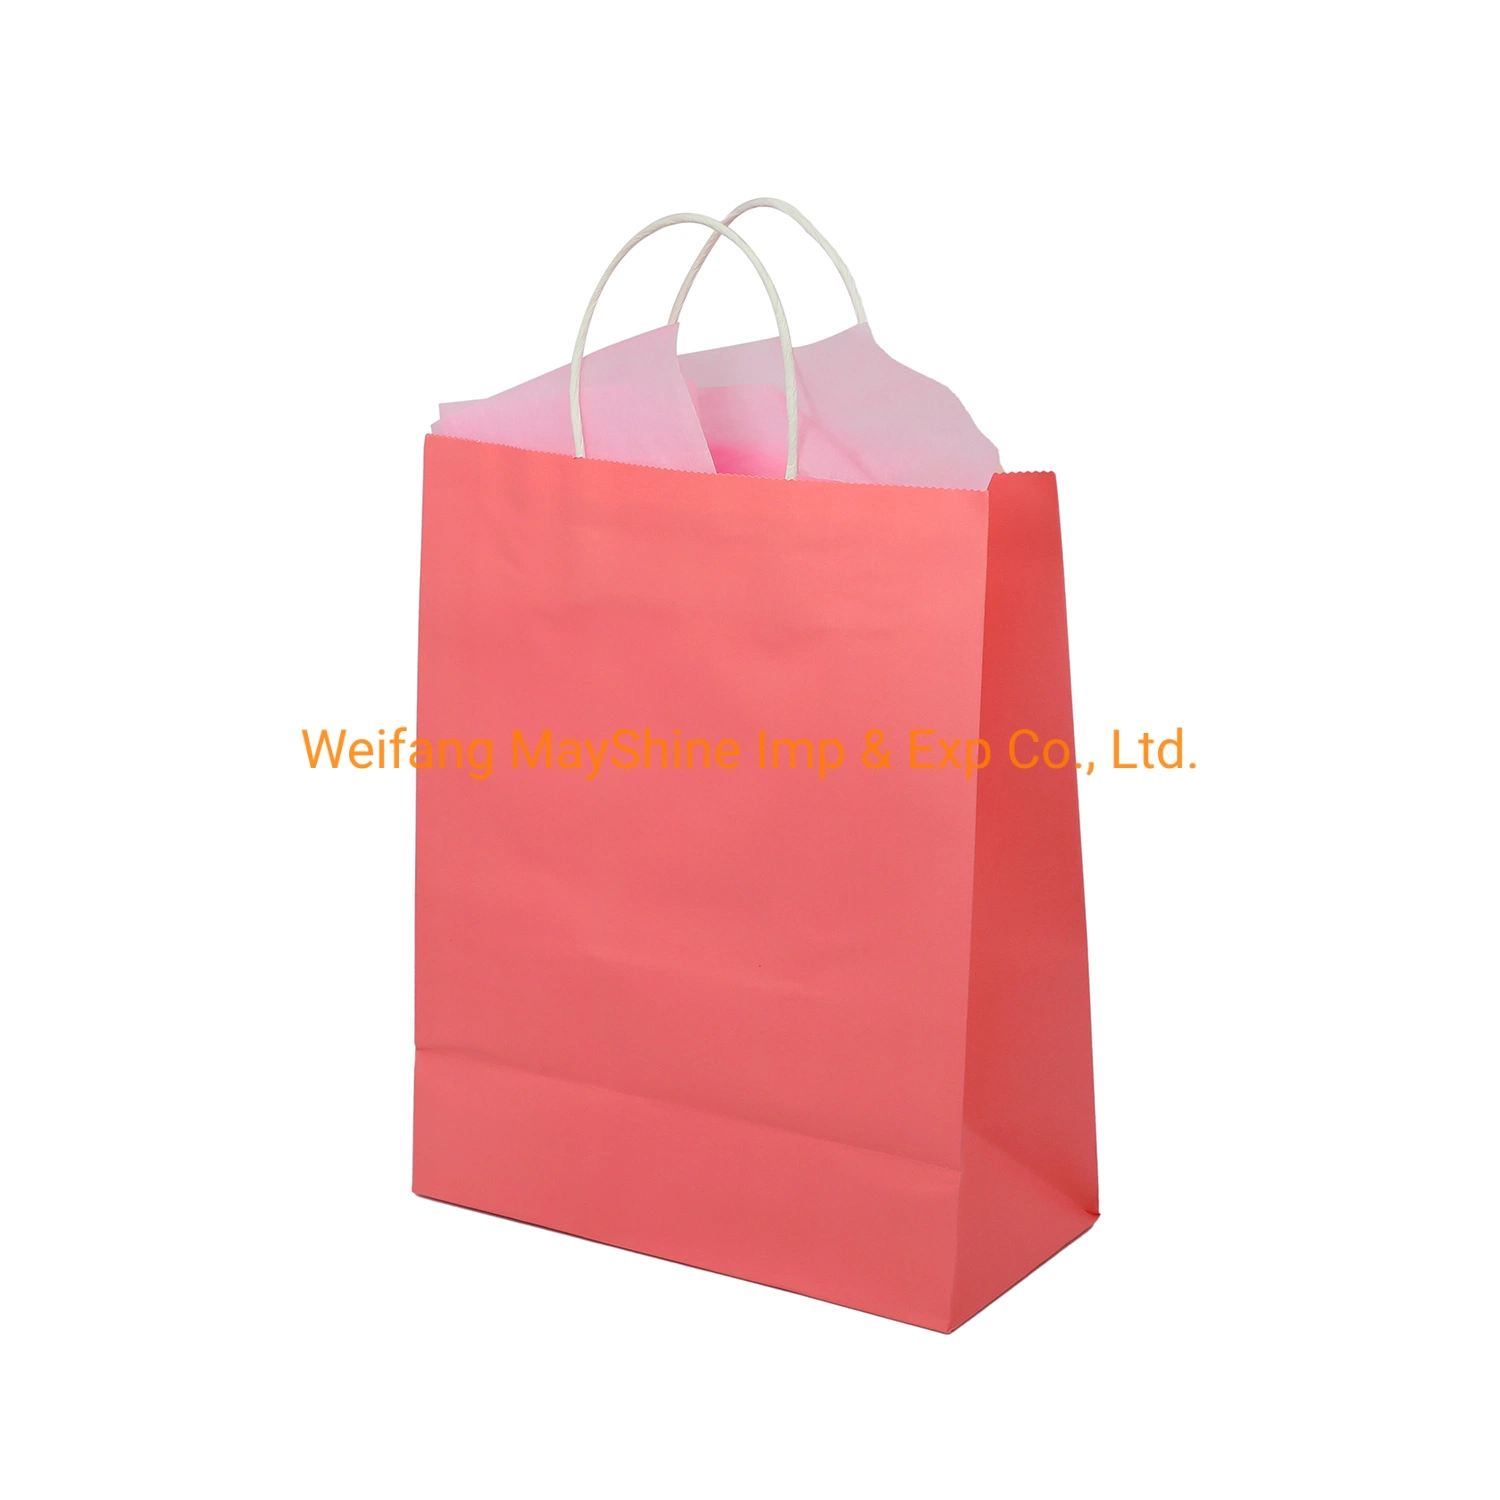 Wholesale/Supplier Luxury Custom Printing Kraft Paper Shopping Packaging Tote Gift Bags for Cosmetic/Clothing/ Gift